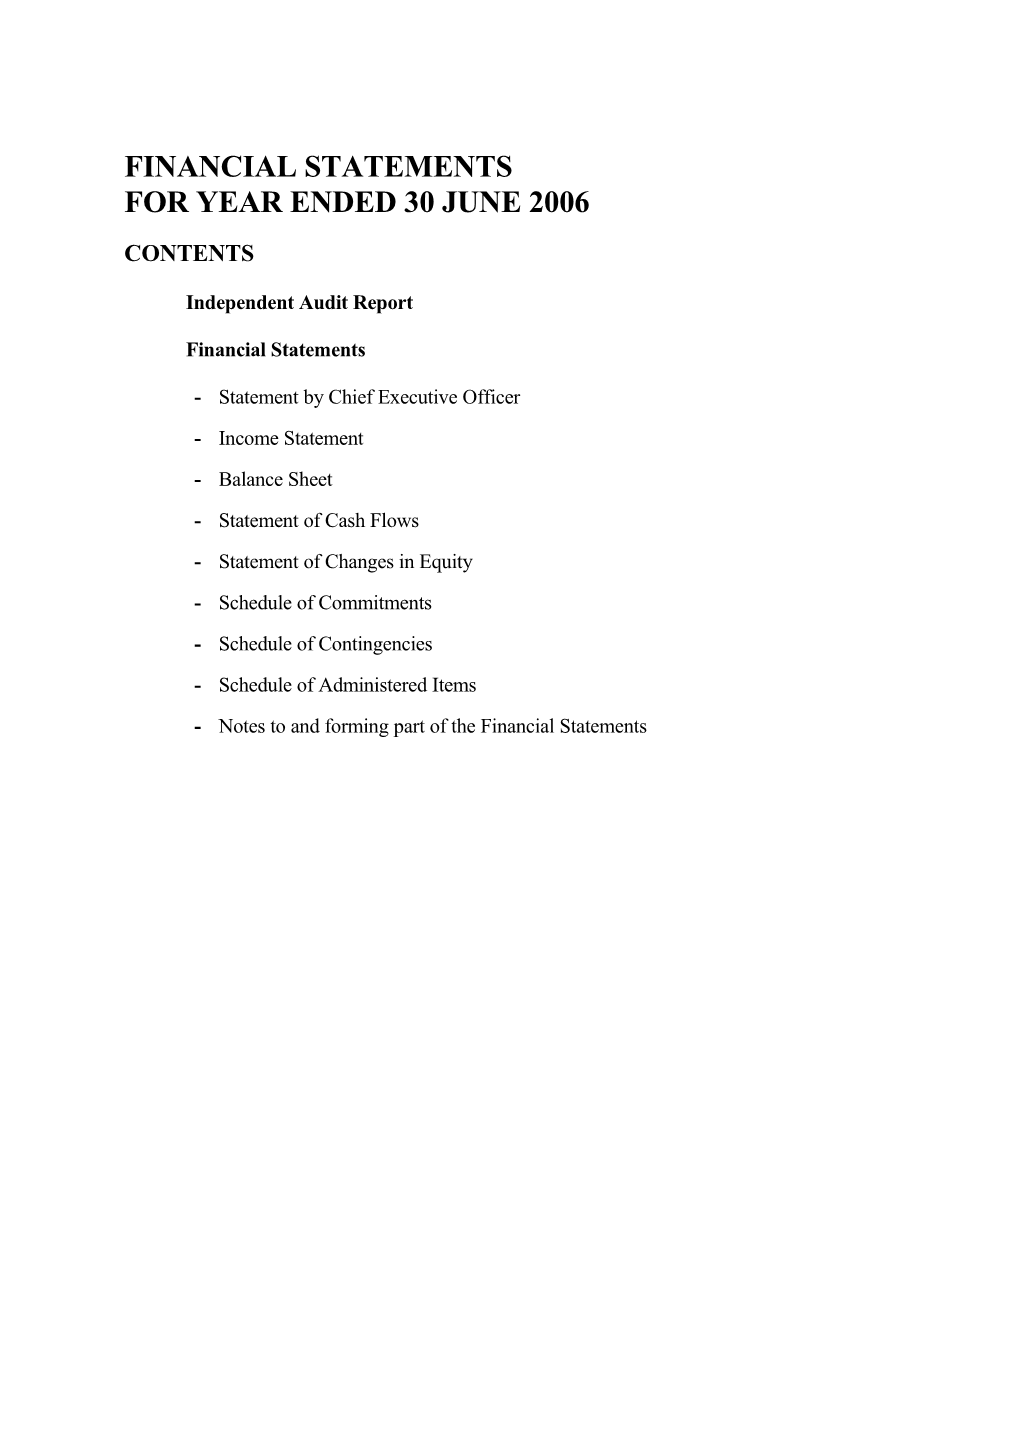 Financial Statements for Year Ended 30 June 2006 (Word Version)